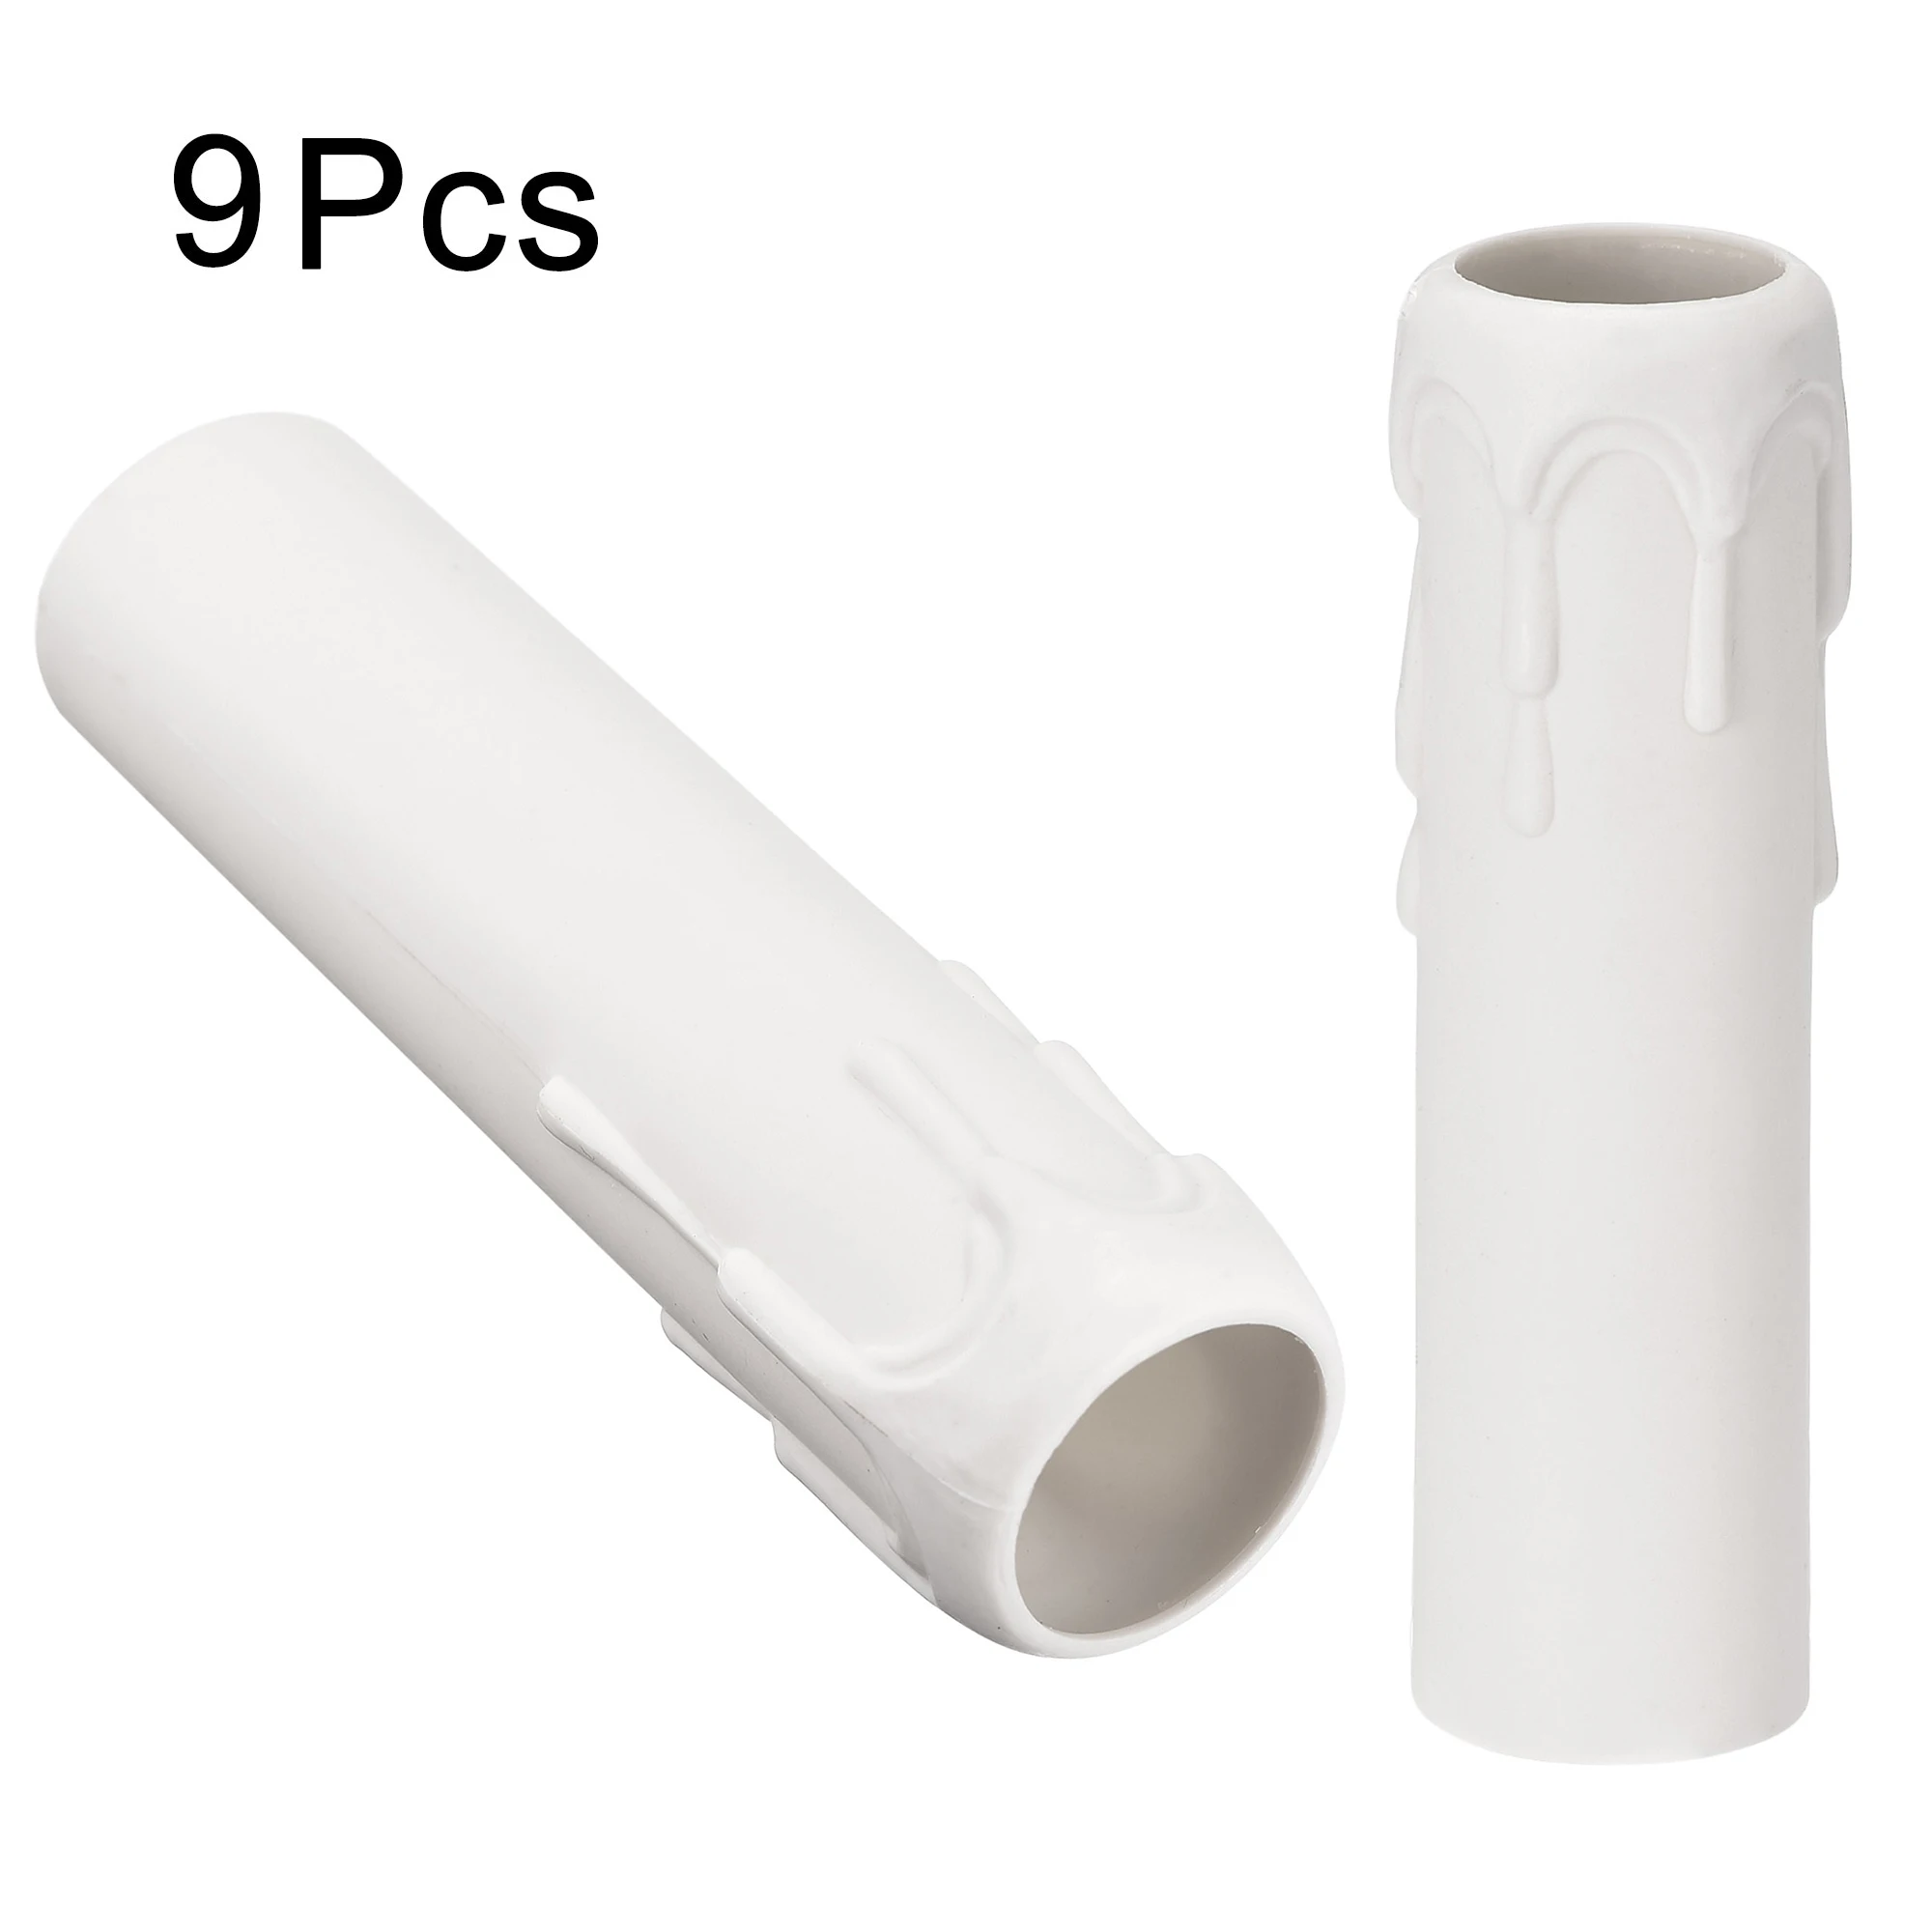 9Pcs 25x100mm White Plastic Candle Bulb Base Covers Sleeves Candle Lamp Holder Tube Candle Lamp Base Sleeve for E14 Chandelier 20 50pcs holographic laser self adhesive bag transparent laser fragment plastic pouch for flash badge package bag card sleeves